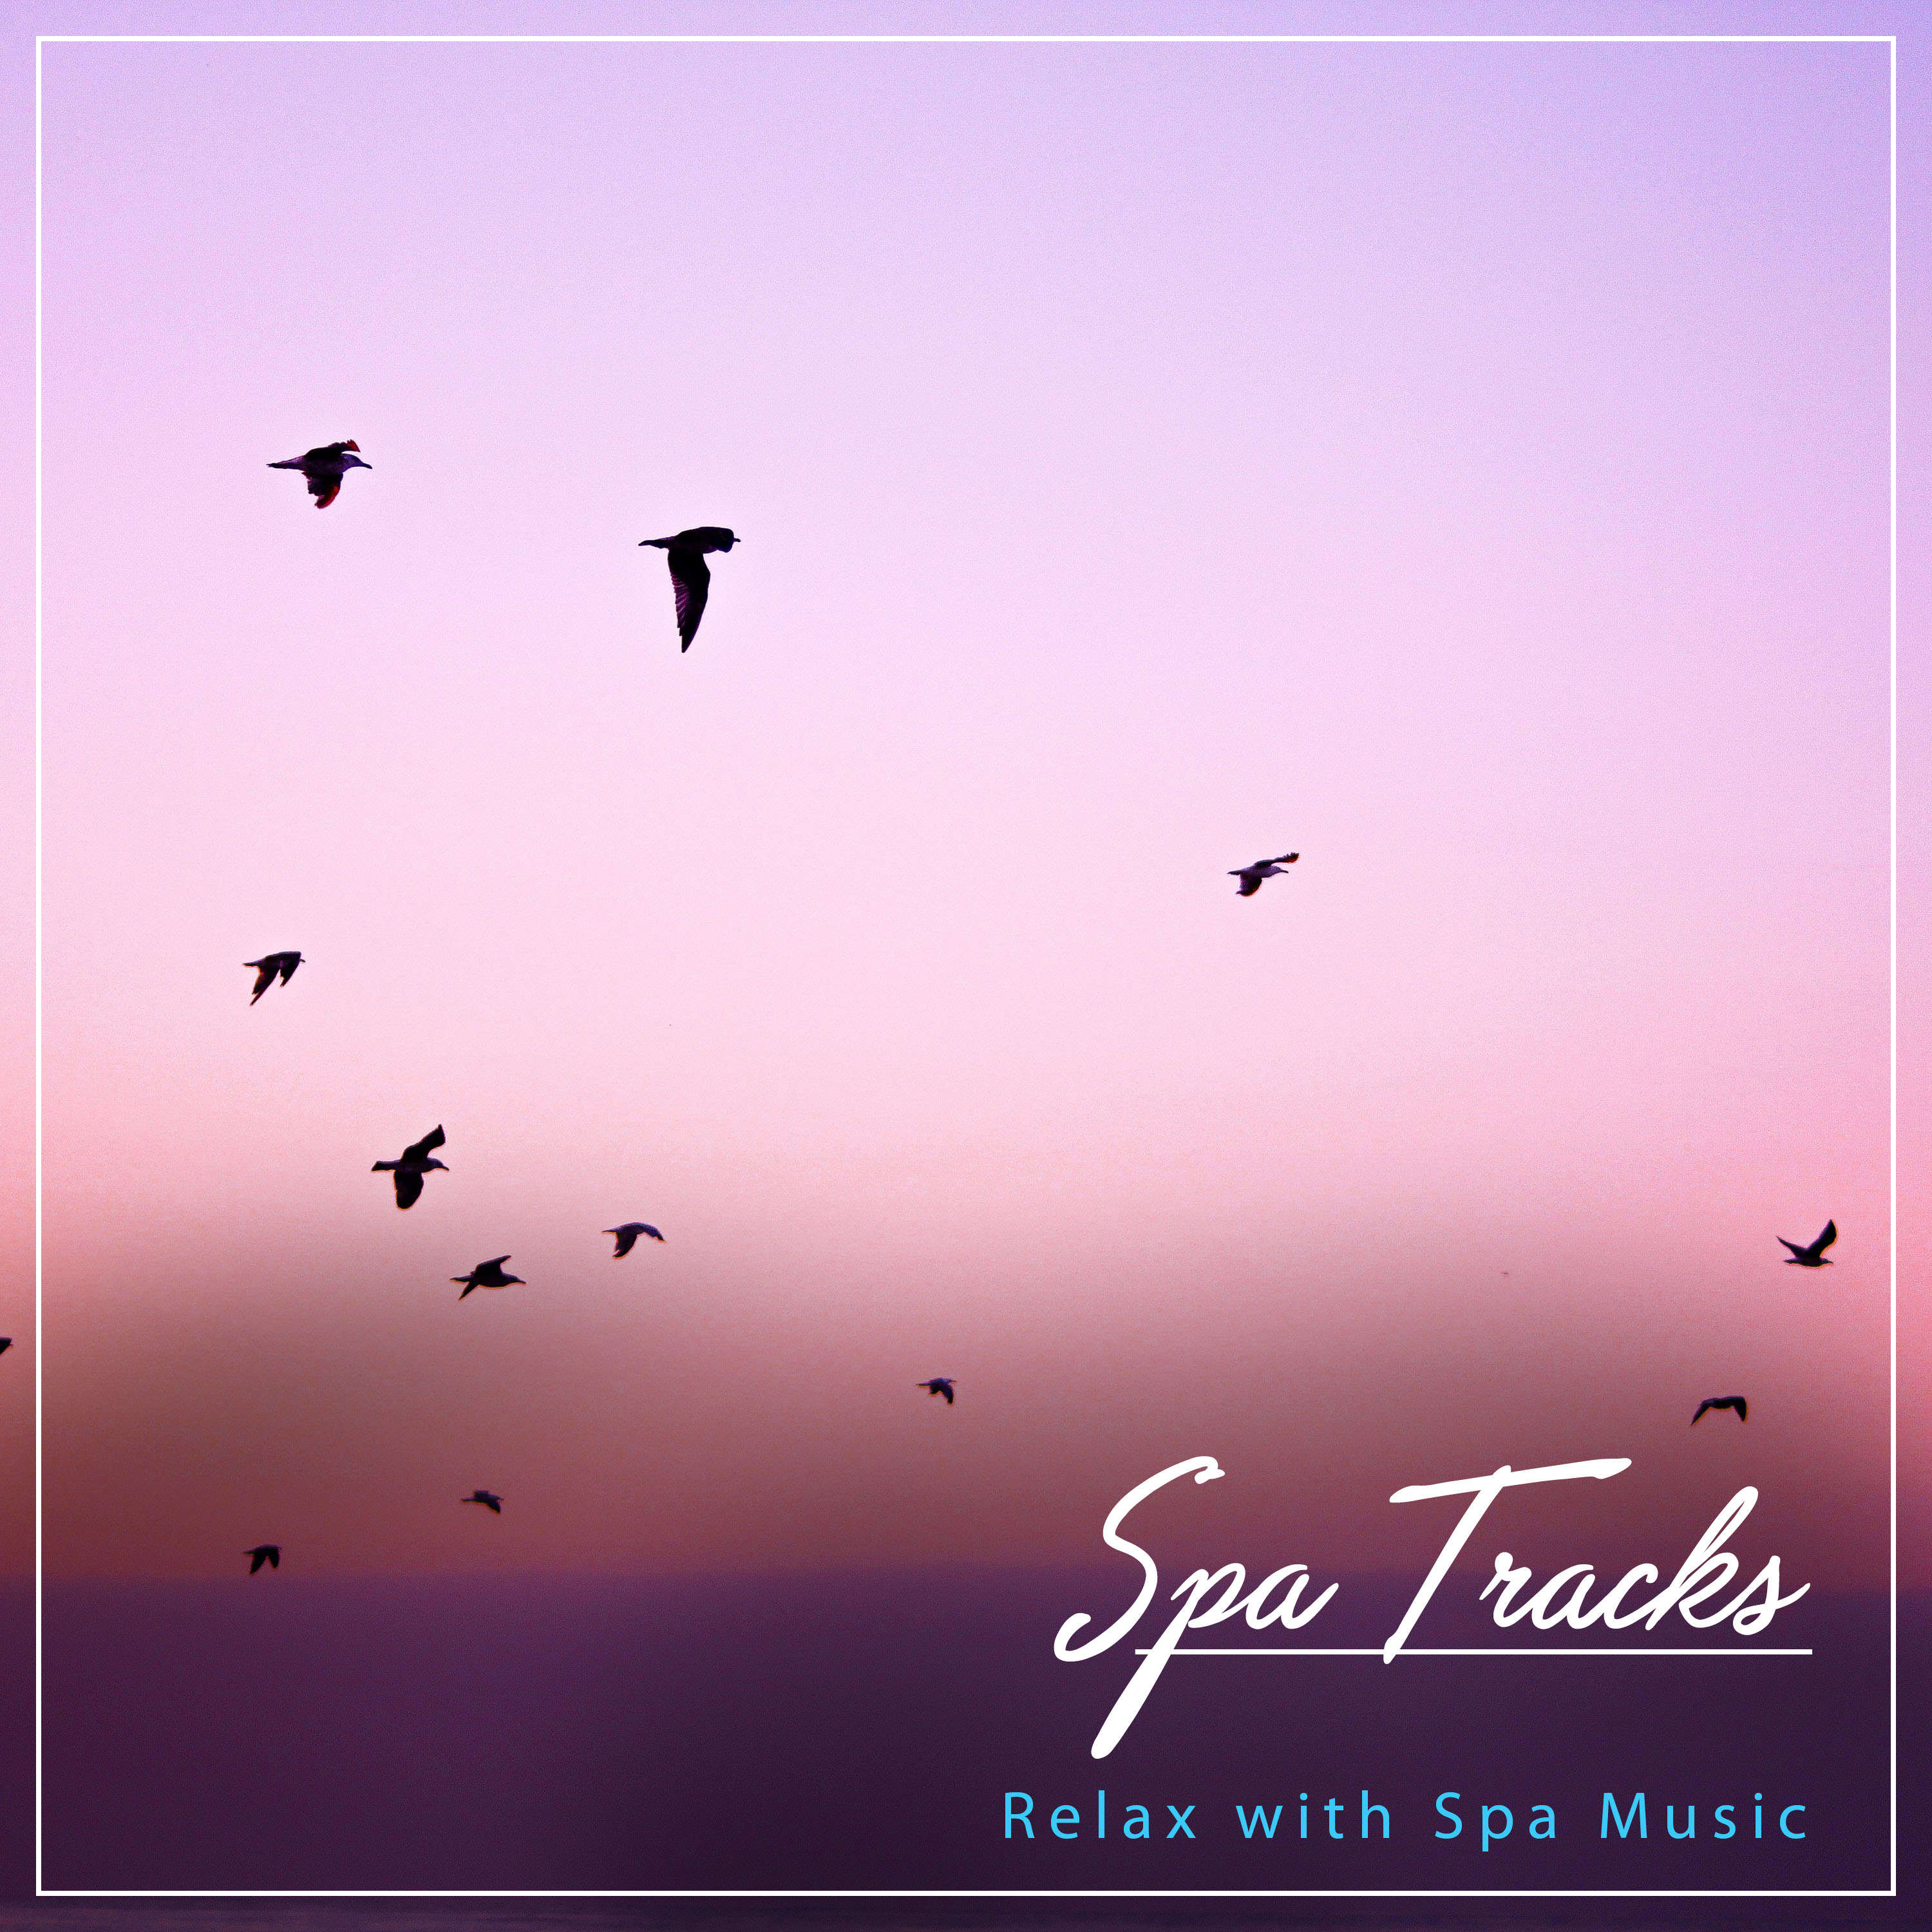 11 Spa Tracks - Relax with Spa Music